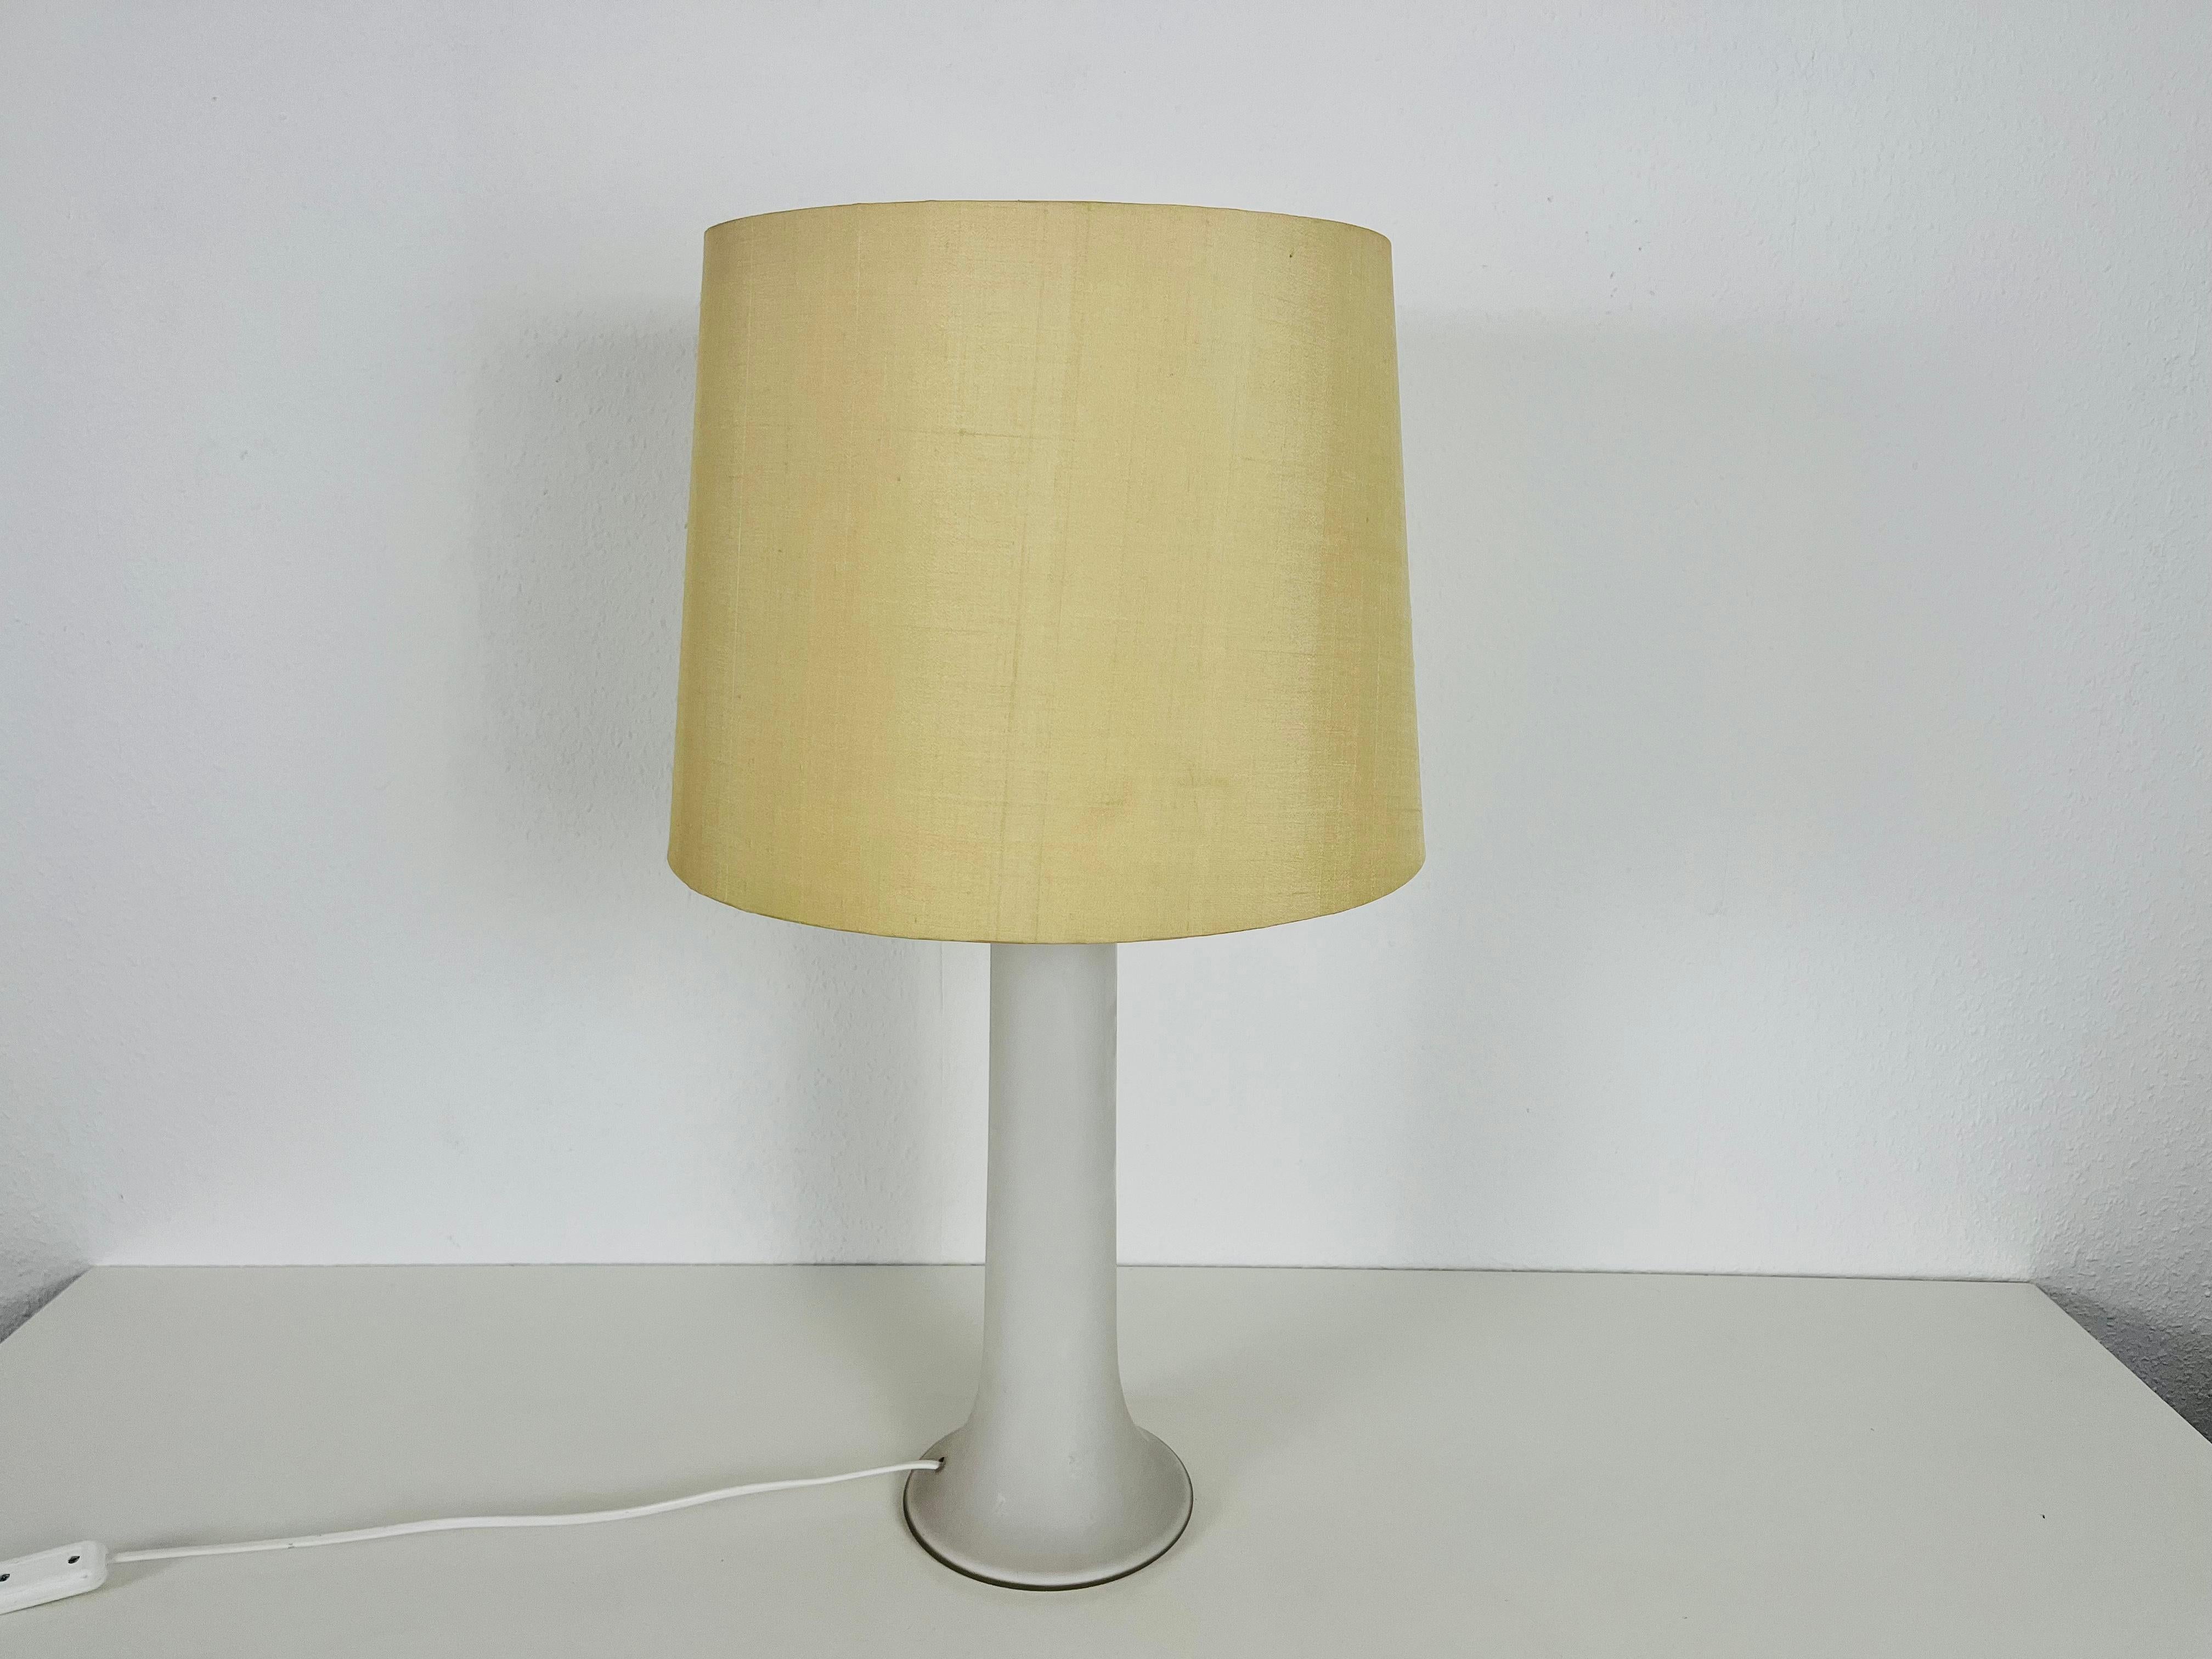 A beautiful large table lamp made in the 1960s by Luxus Sweden. The base is made of white glass. The lamp shade is made of fabric and has a beige color.

The light requires one E27 light bulb. Works with both 120/220 V. Good vintage condition.

Free